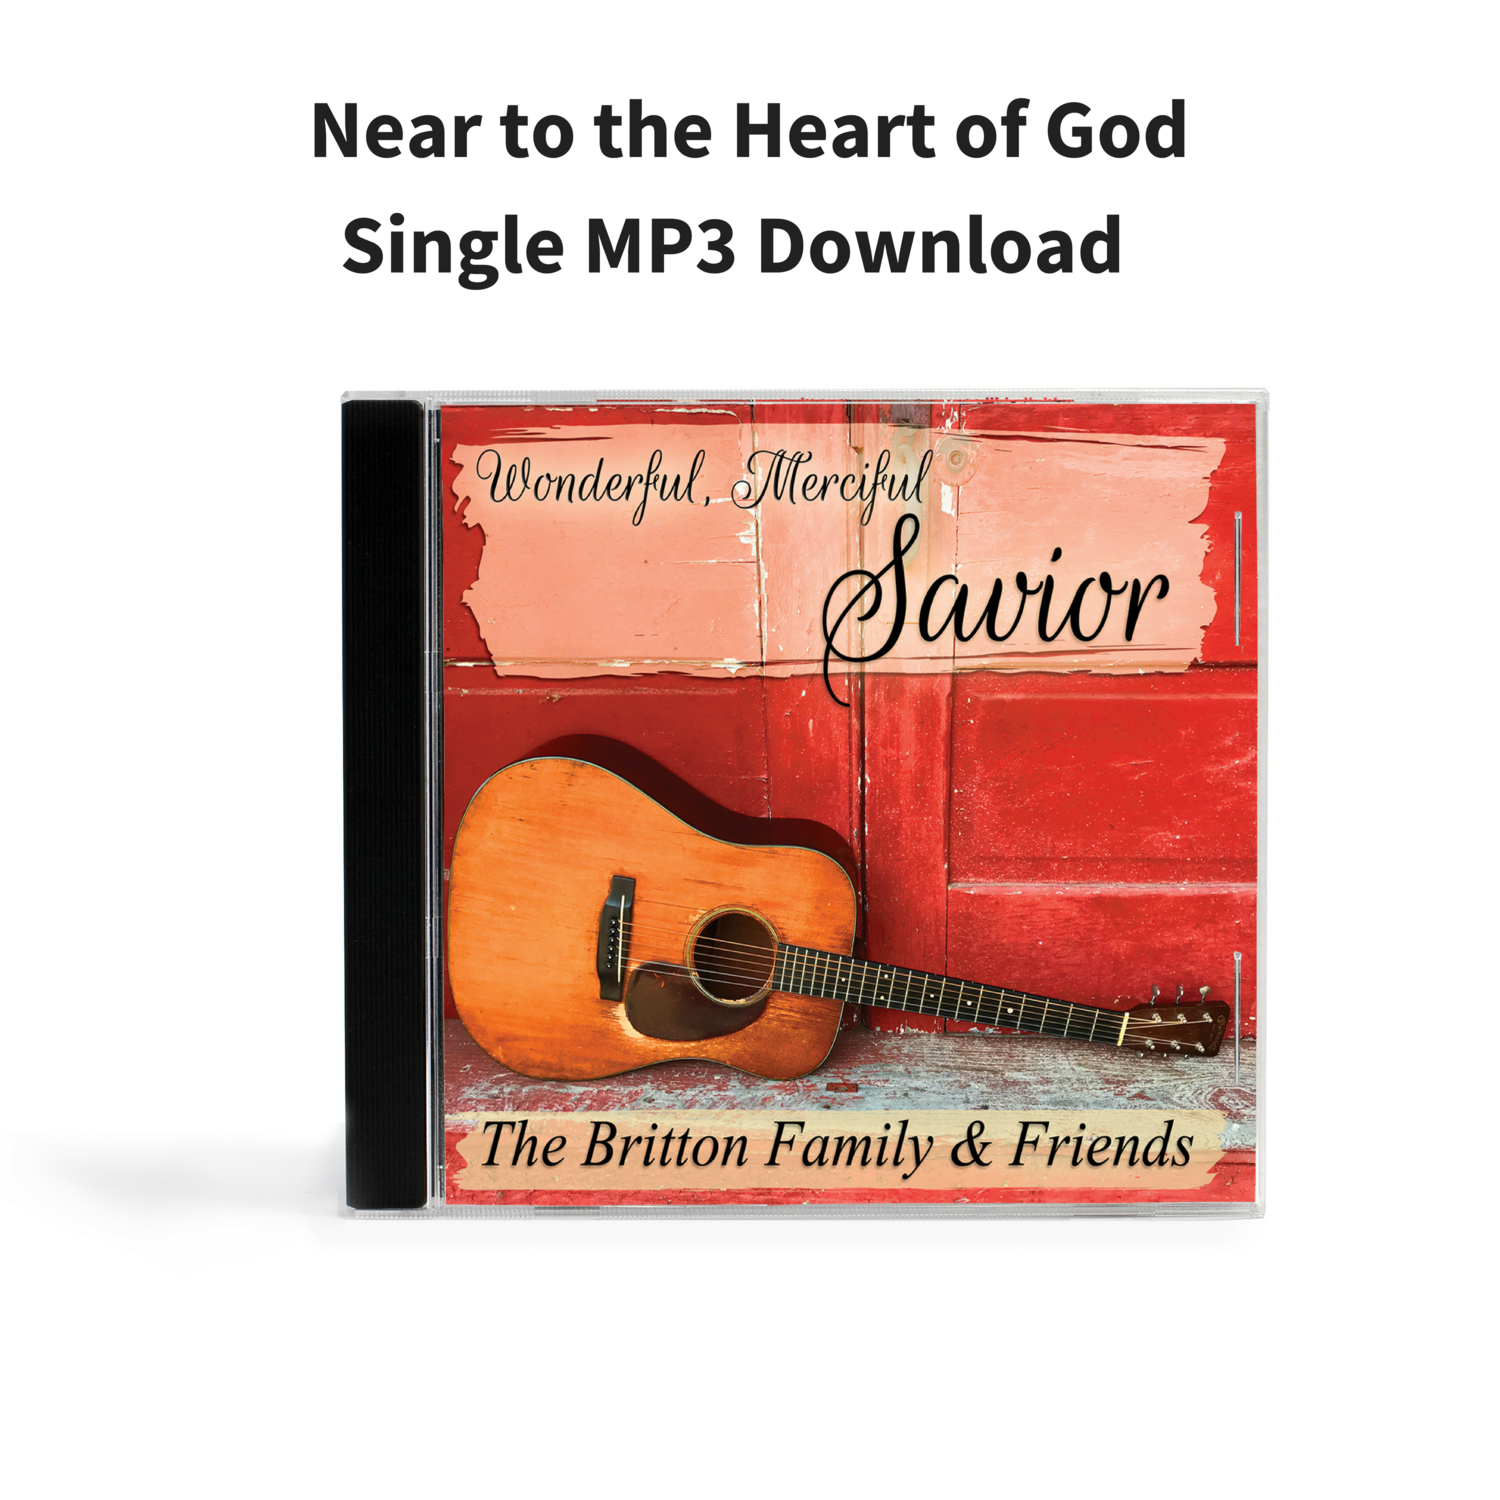 Near to the Heart of God - Single MP3 Download